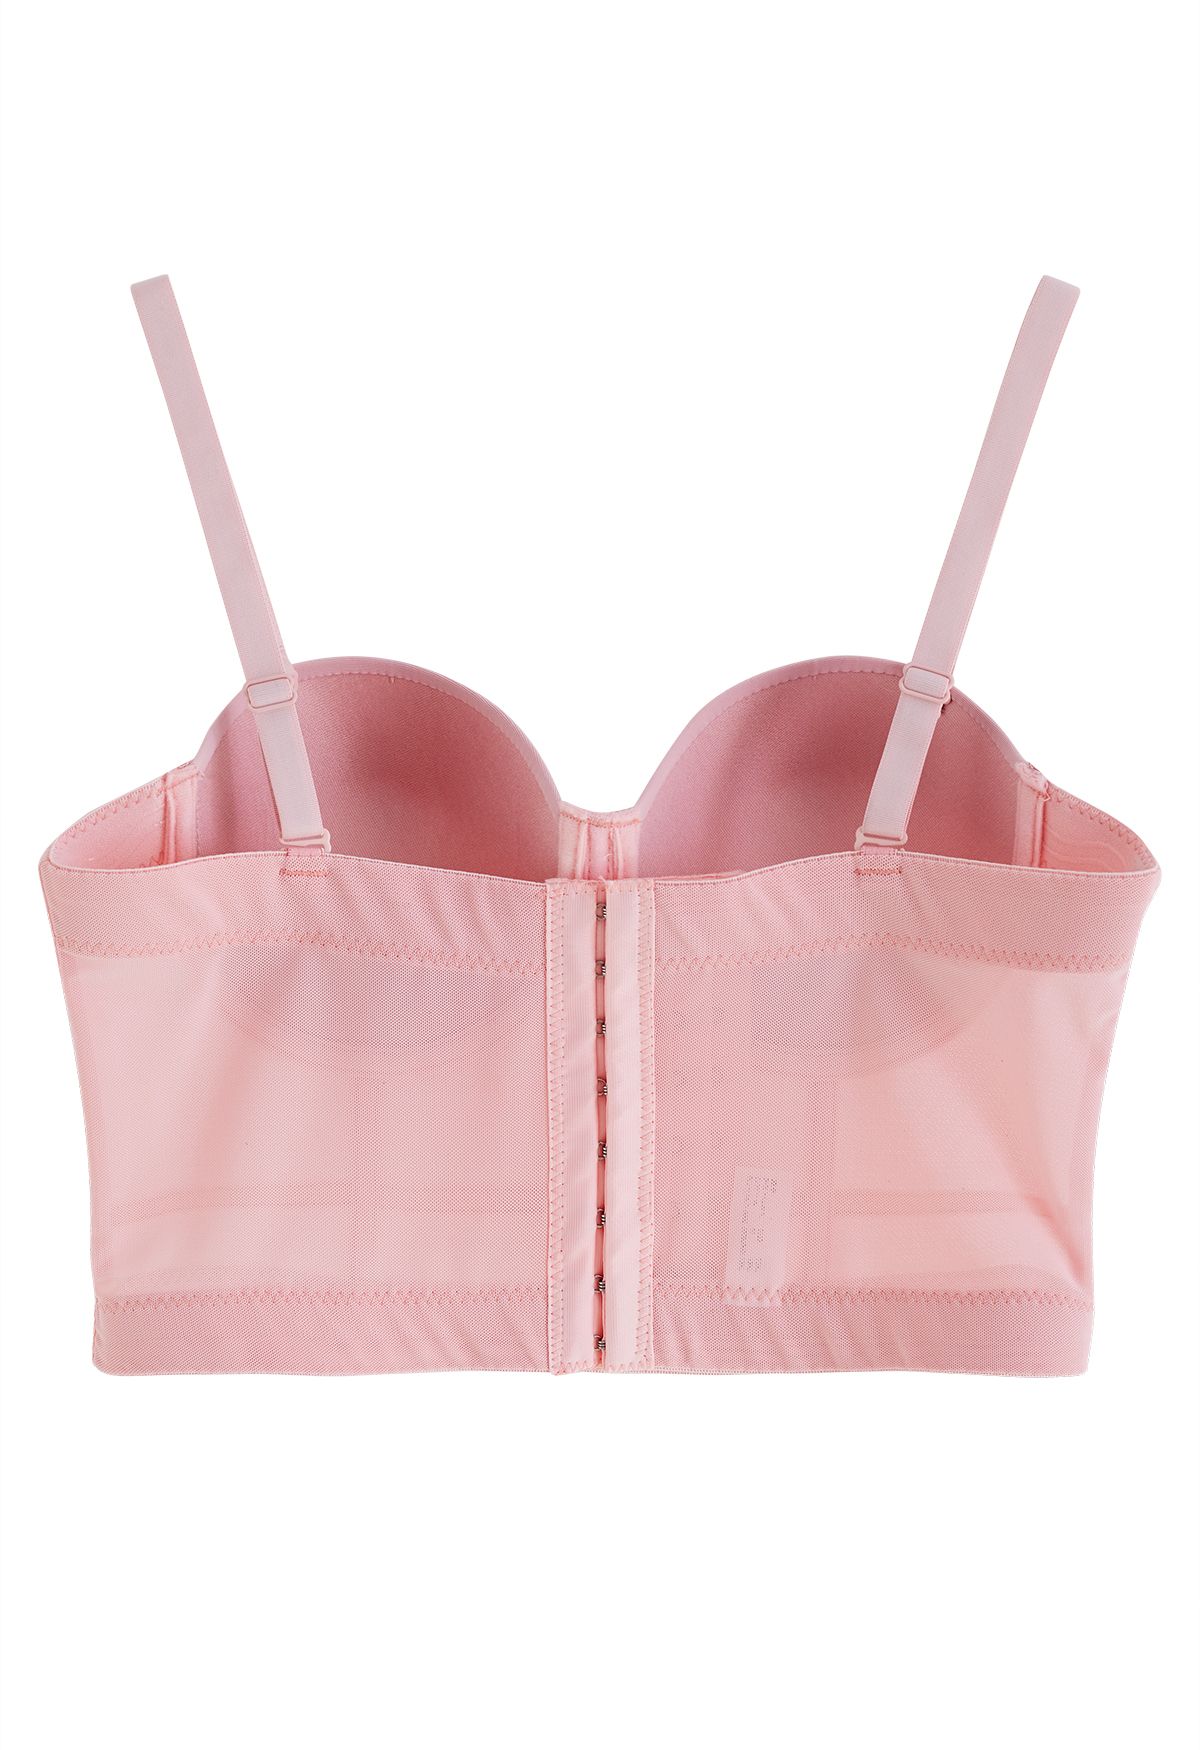 Buy TULIE (B) PEACH solid color full-coverage T Shirt bra for